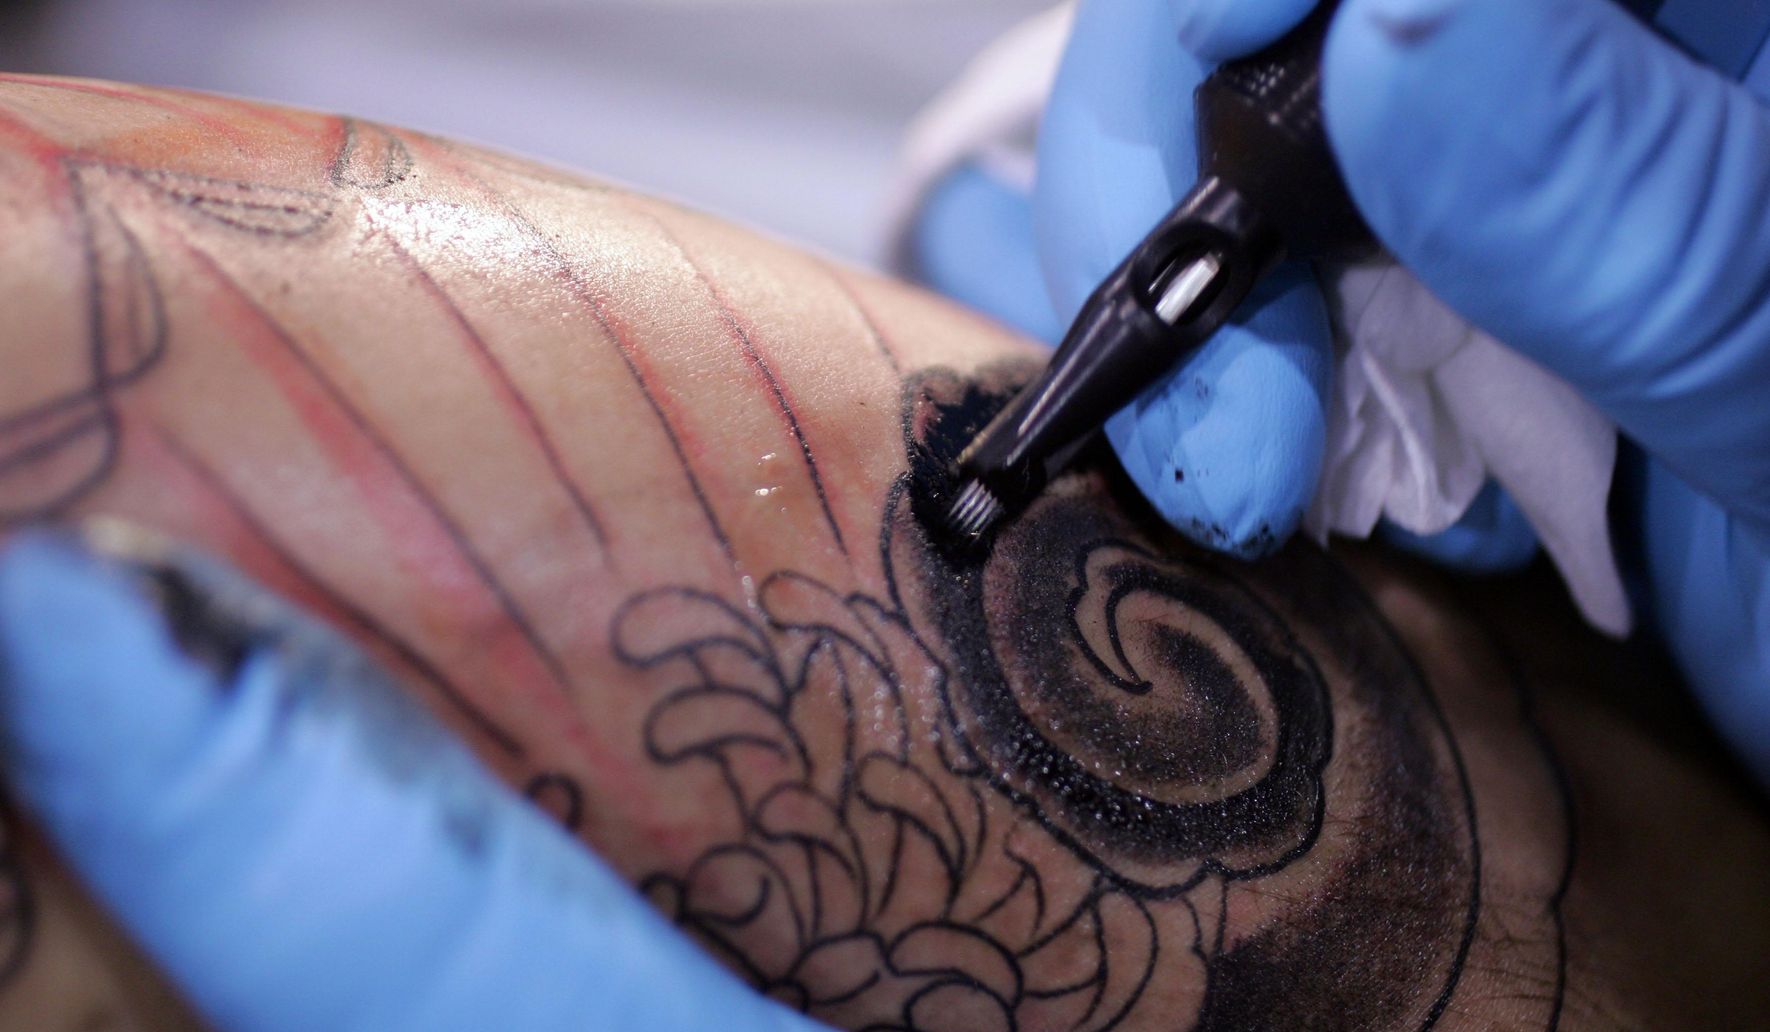 Turkey issues fatwa against tattoos: Remove or repent - Washington Times